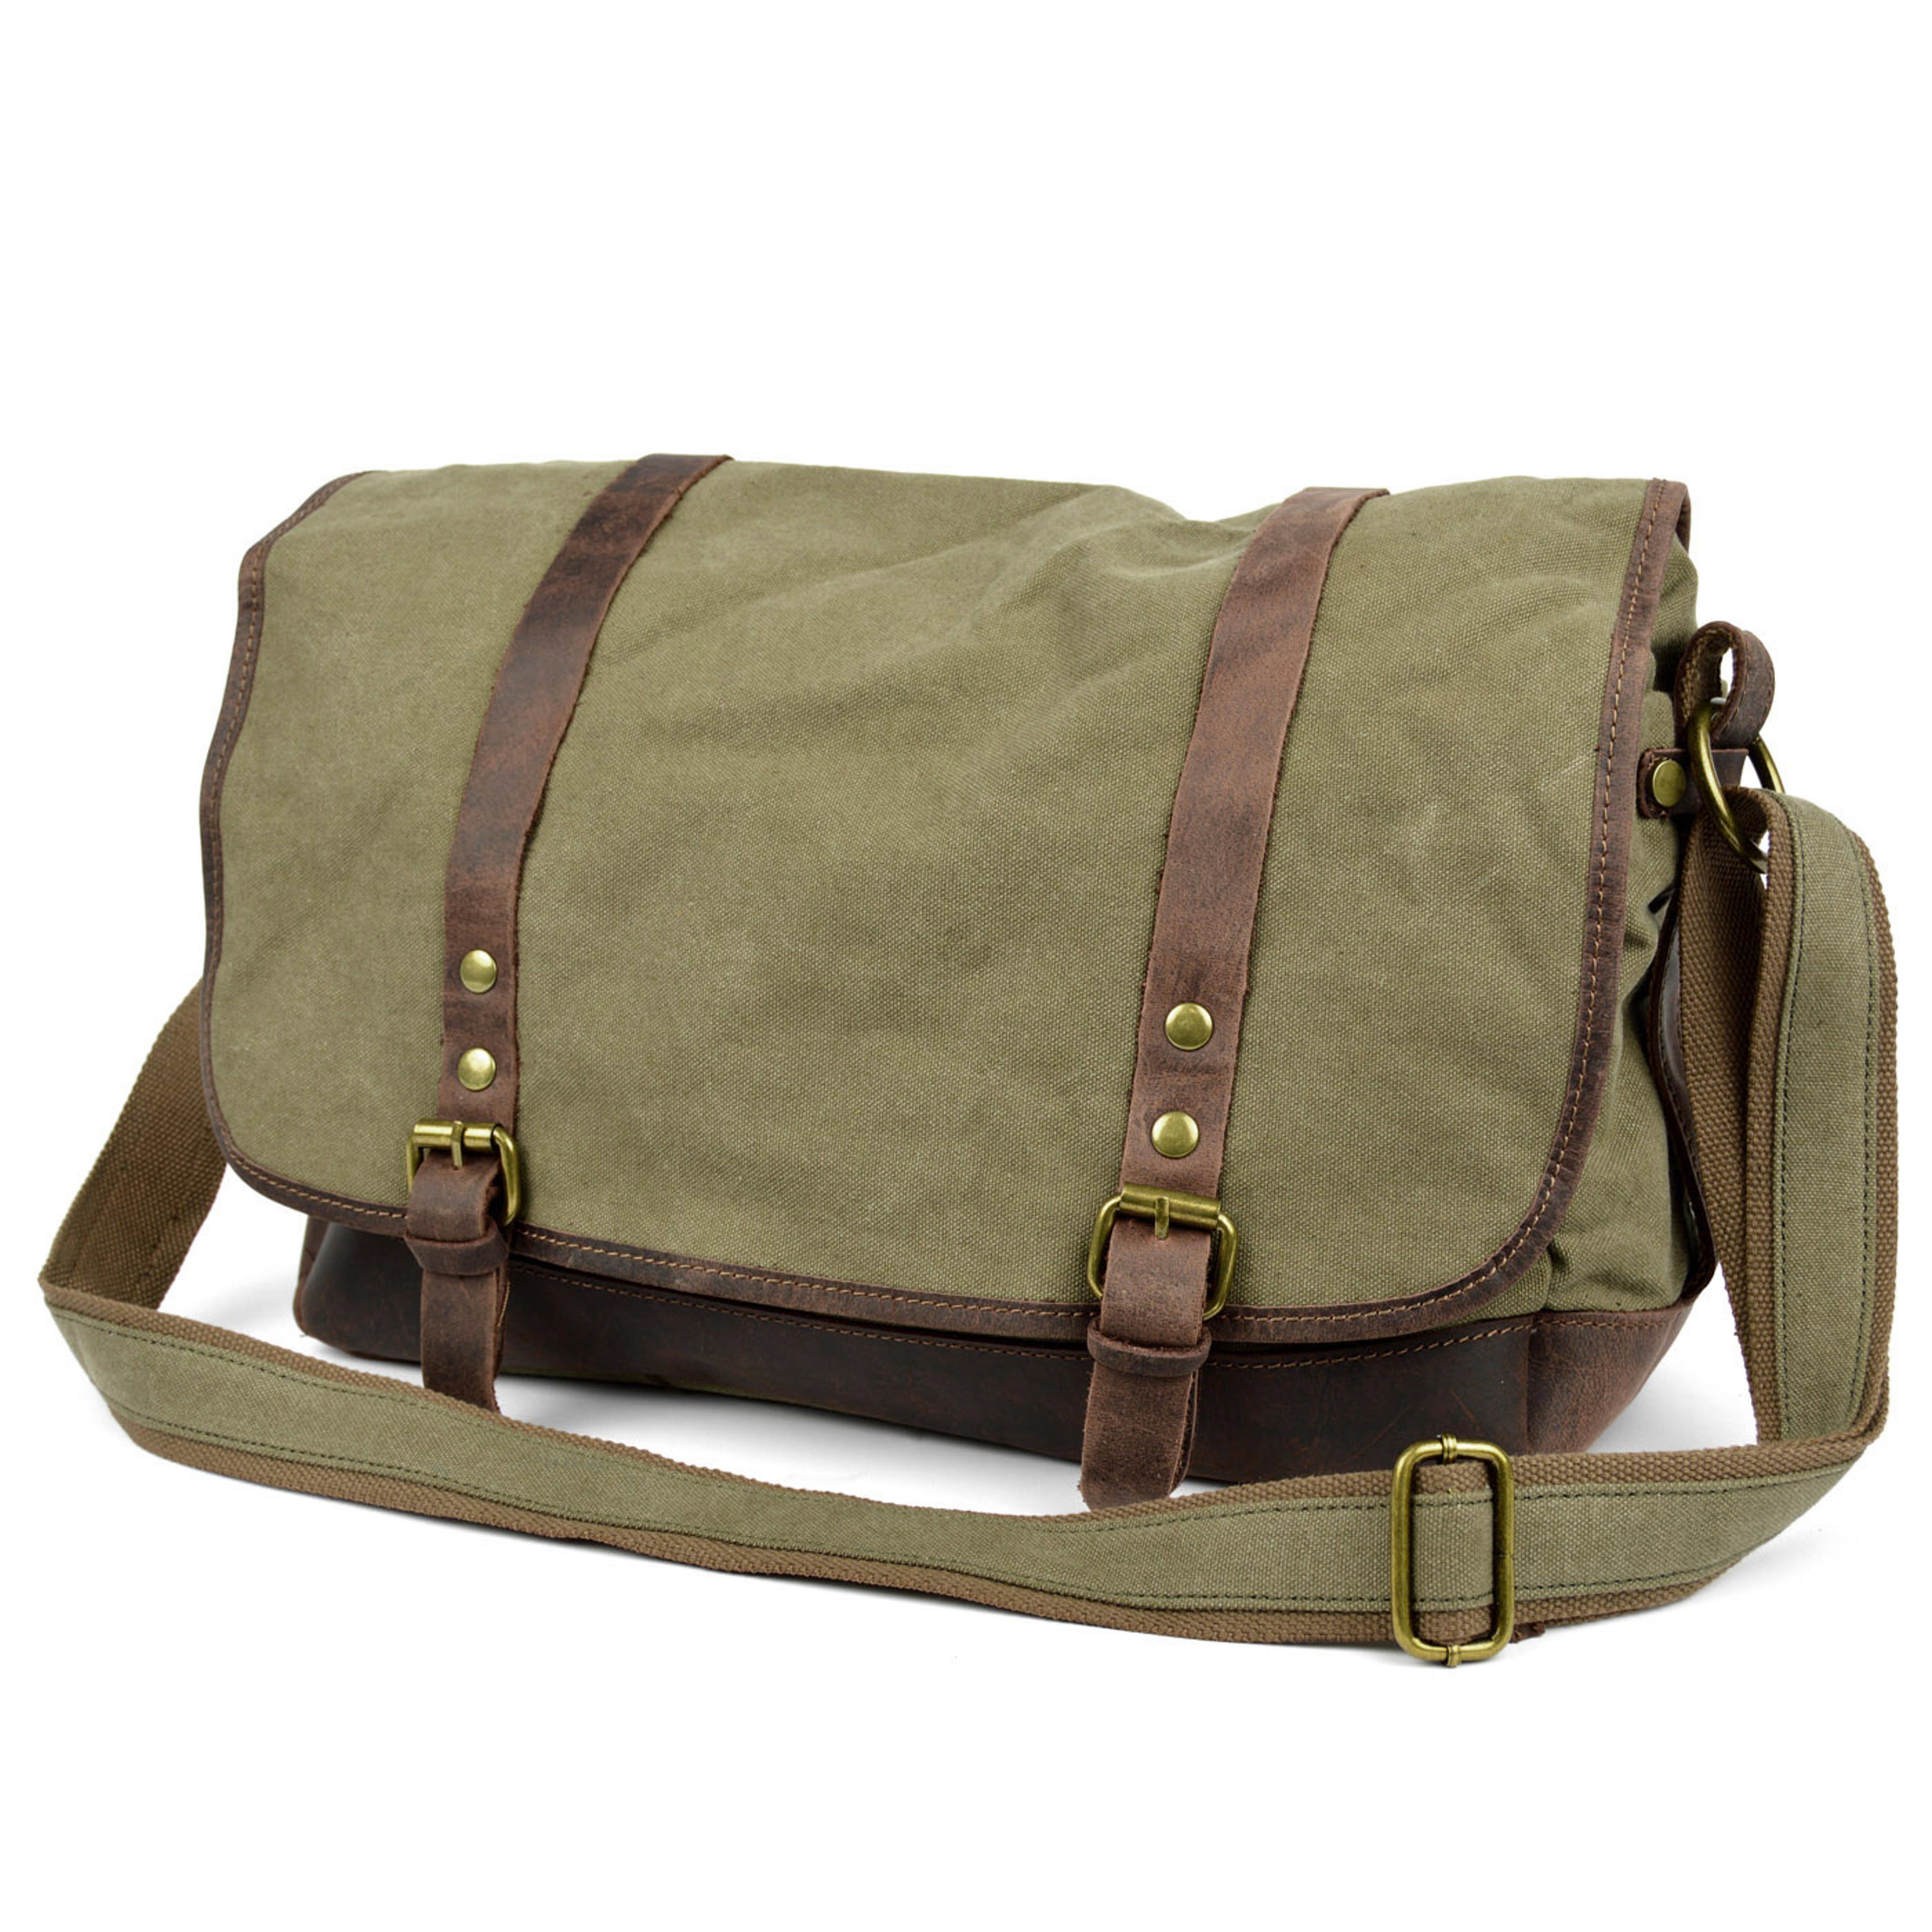 Vintage-Style Army Green Canvas & Leather Messenger Bag